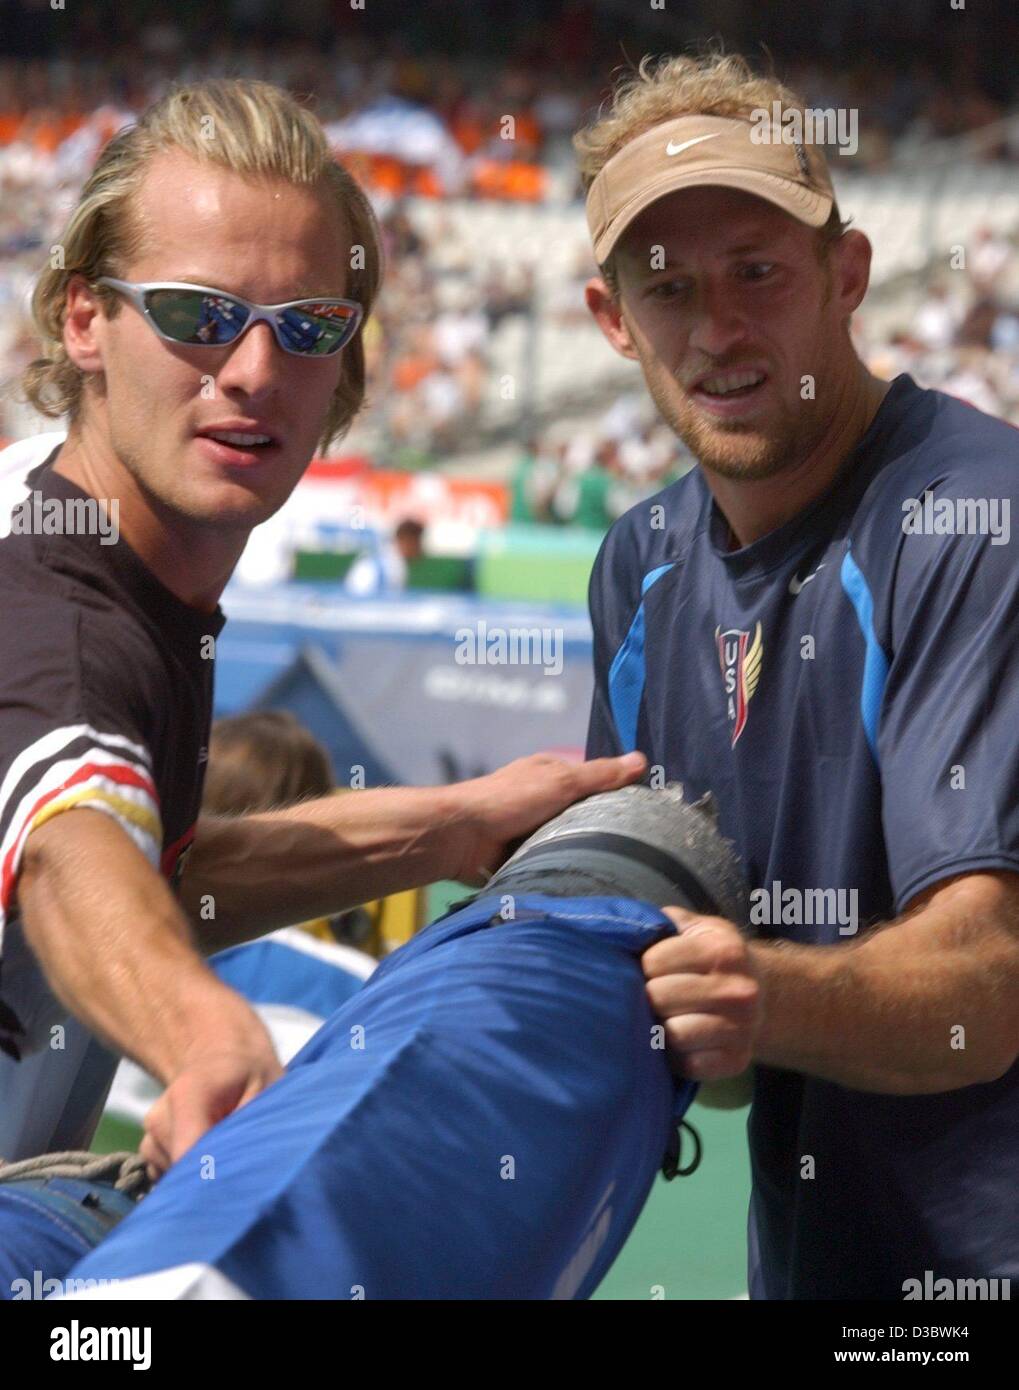 (dpa) - Germany's Andre Niklaus (L) and his US opponent Tom Pappas (R) bag their poles after the pole vault competition of the decathlon event at the 9th IAAF Athletic World Championships at the Stade de France in Paris, 27 August 2003. Pappas wins the decathlon with a total score of 8750 points, Ni Stock Photo